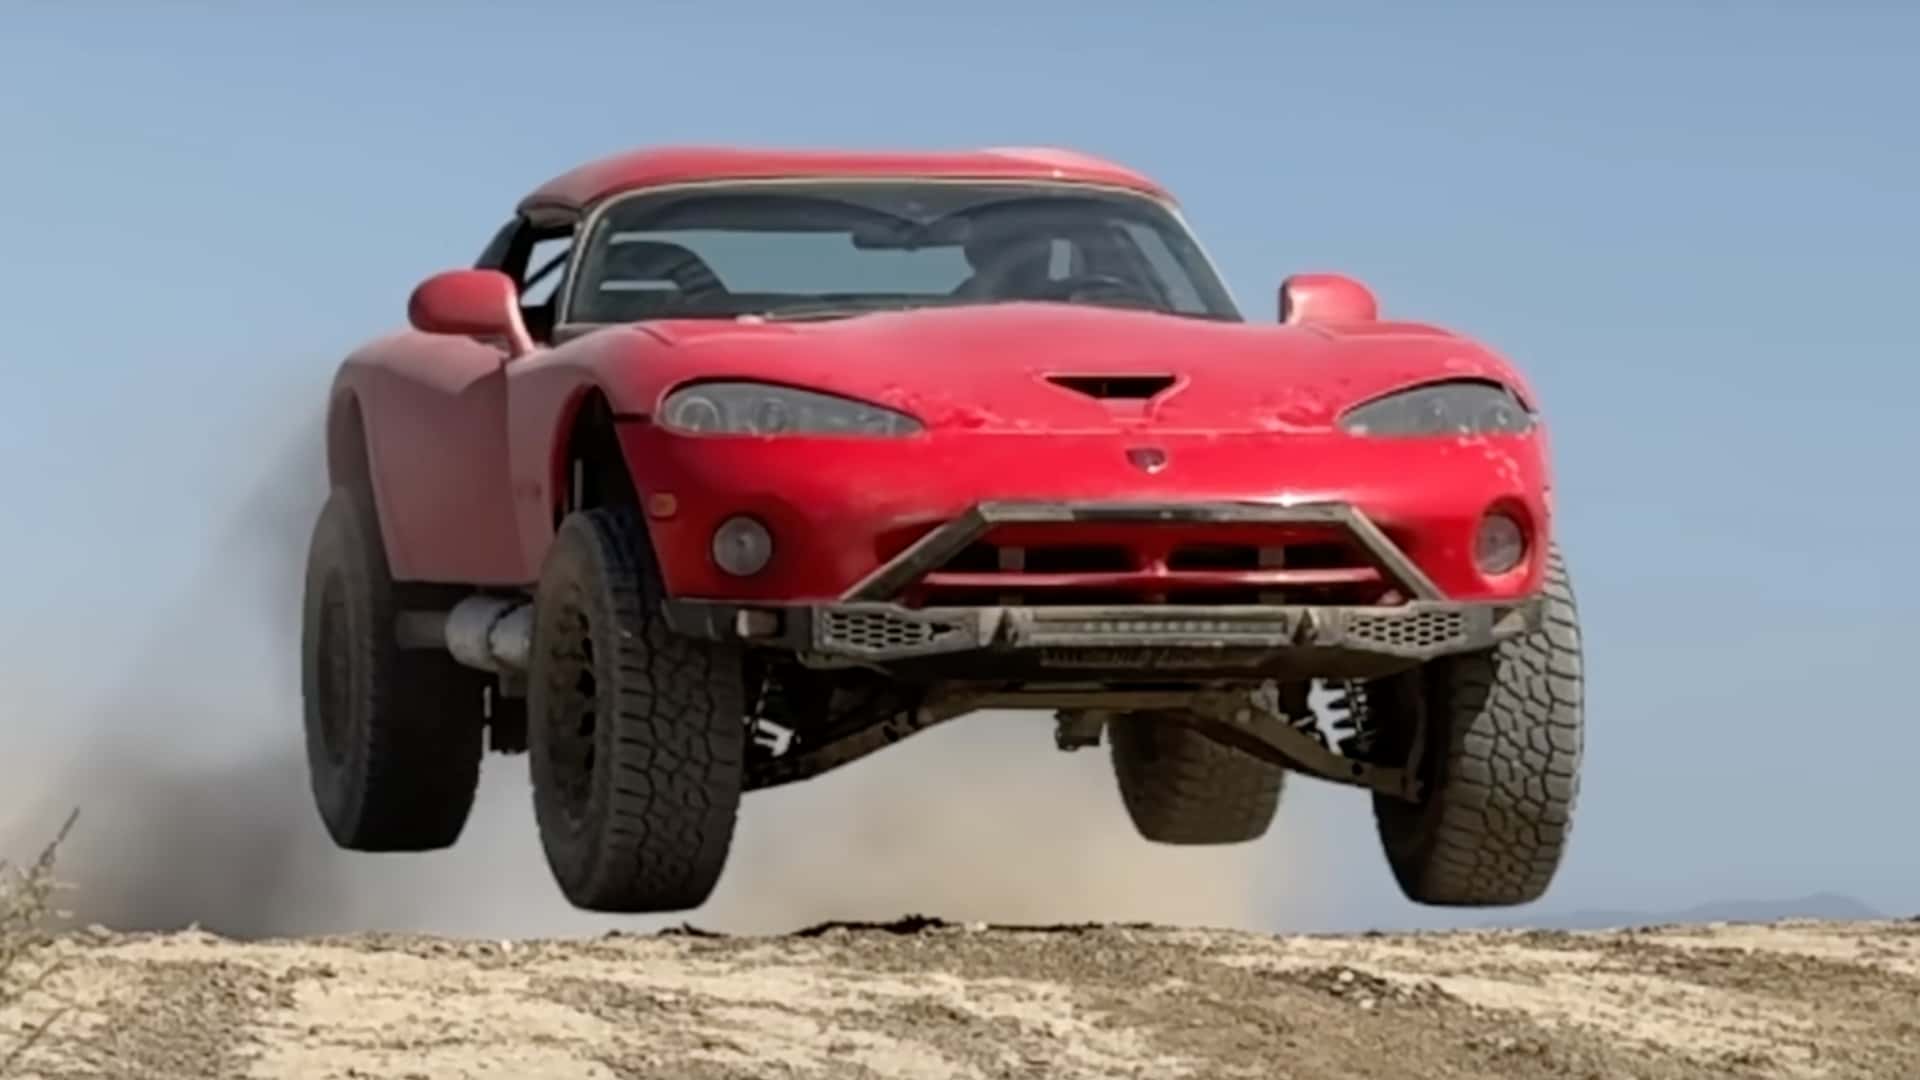 First-generation Dodge Viper undergoes transformation into aggressive off-road vehicle